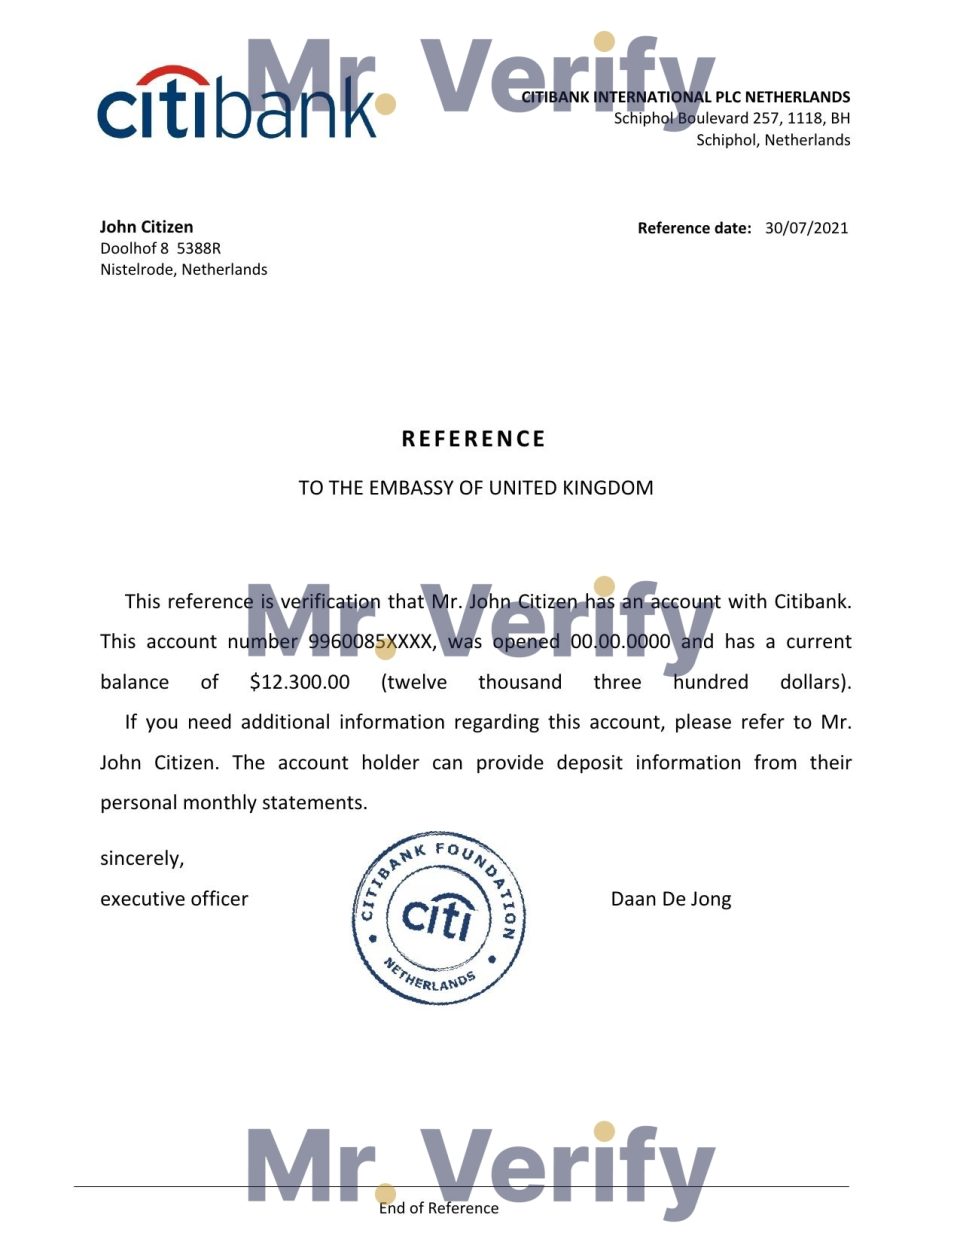 Download Netherlands Citibank Bank Reference Letter Templates | Editable Word